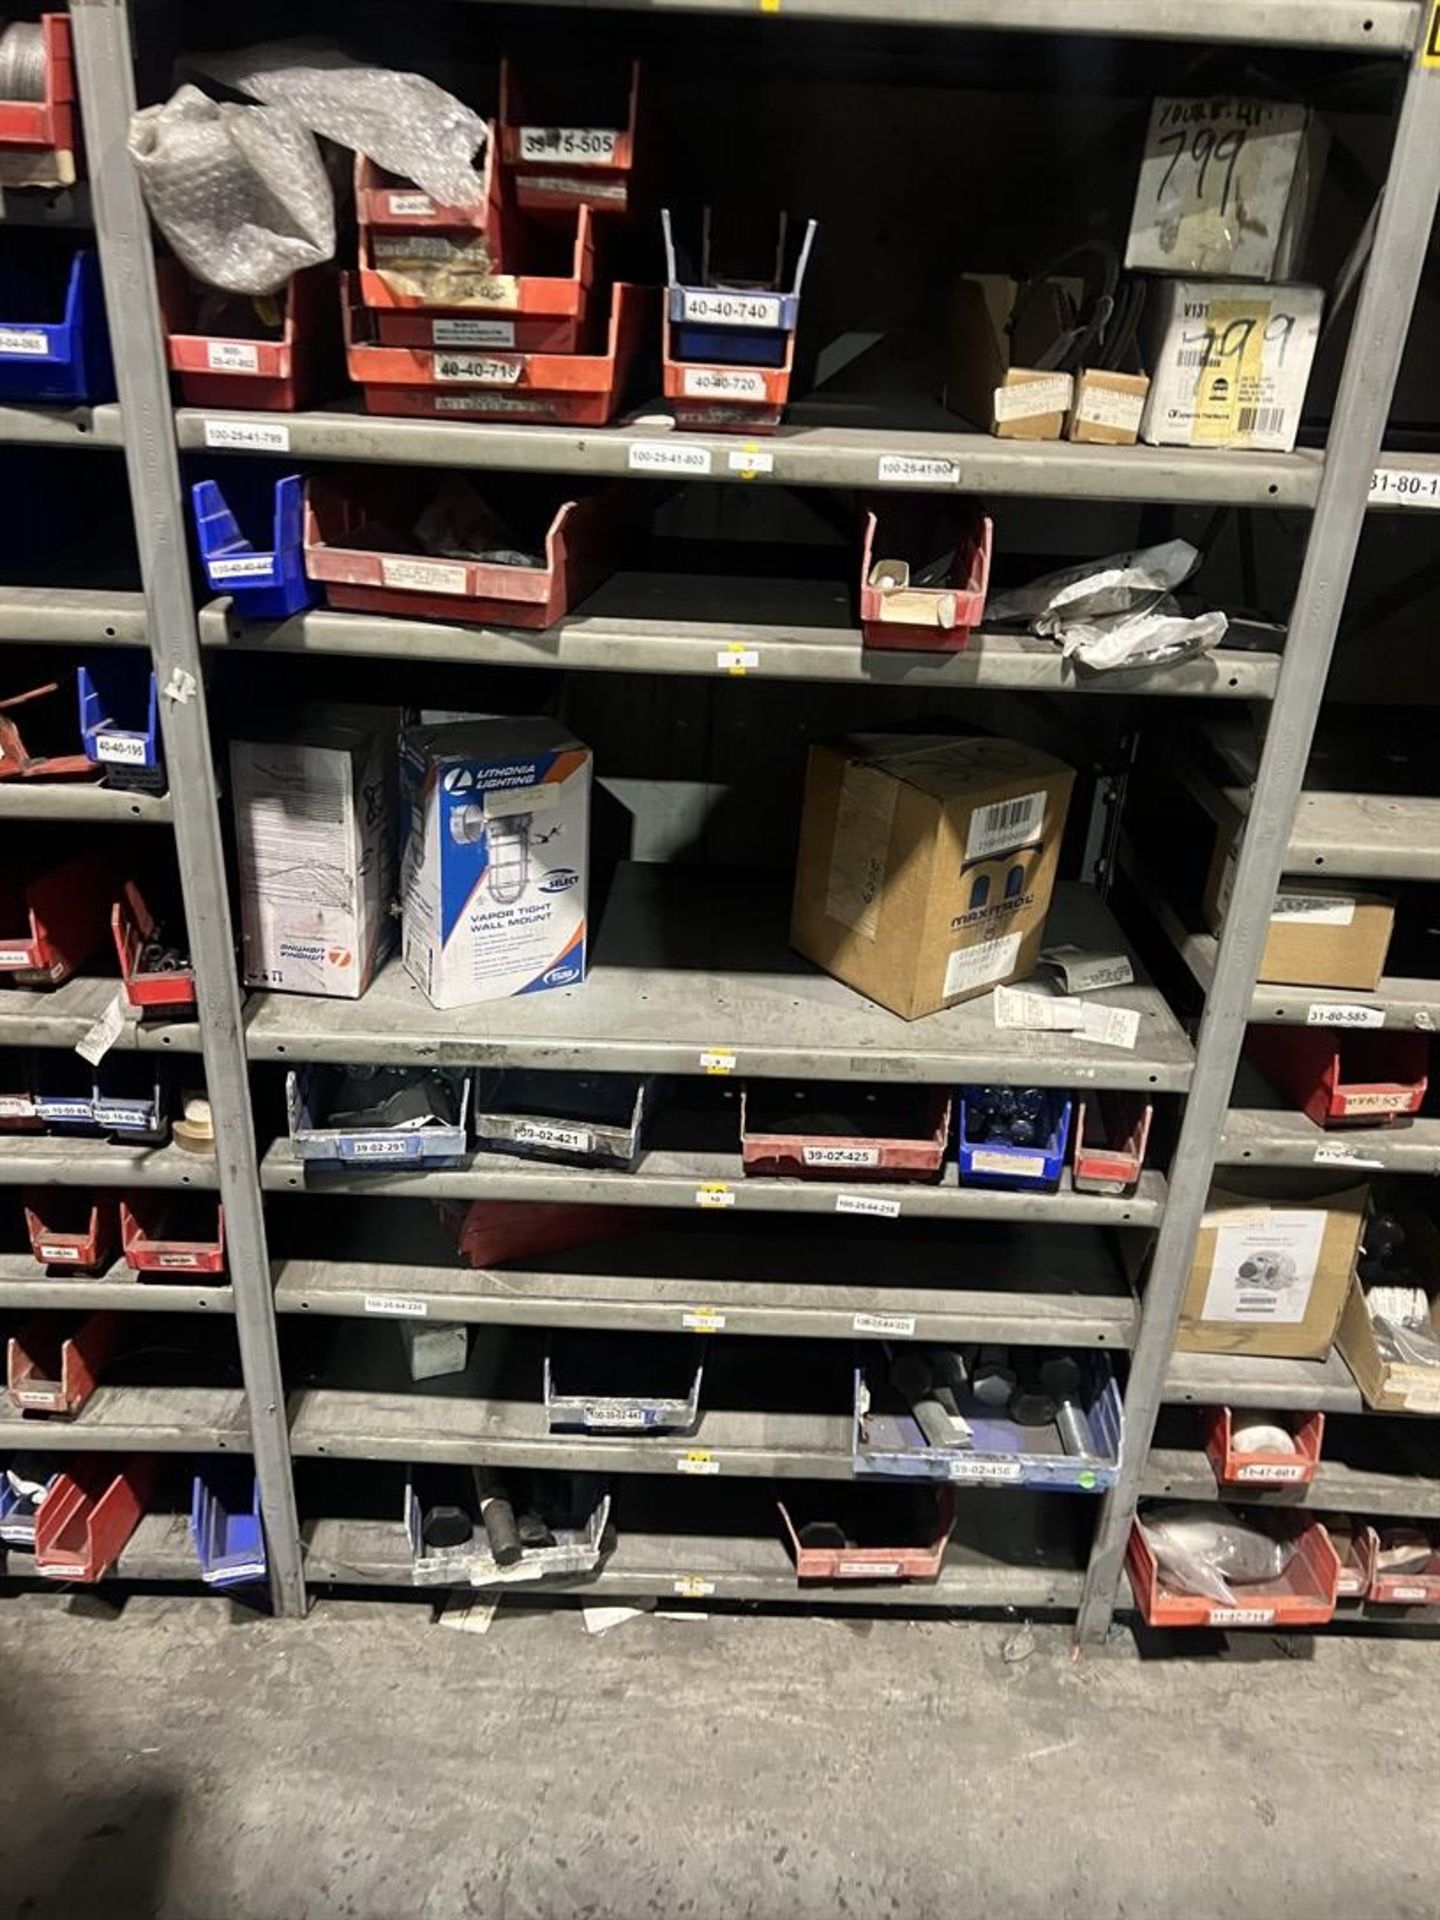 Lot Comprising (9) Shop Shelving Units w/ Assorted Air and Oil Filters, Hardware - Image 13 of 17